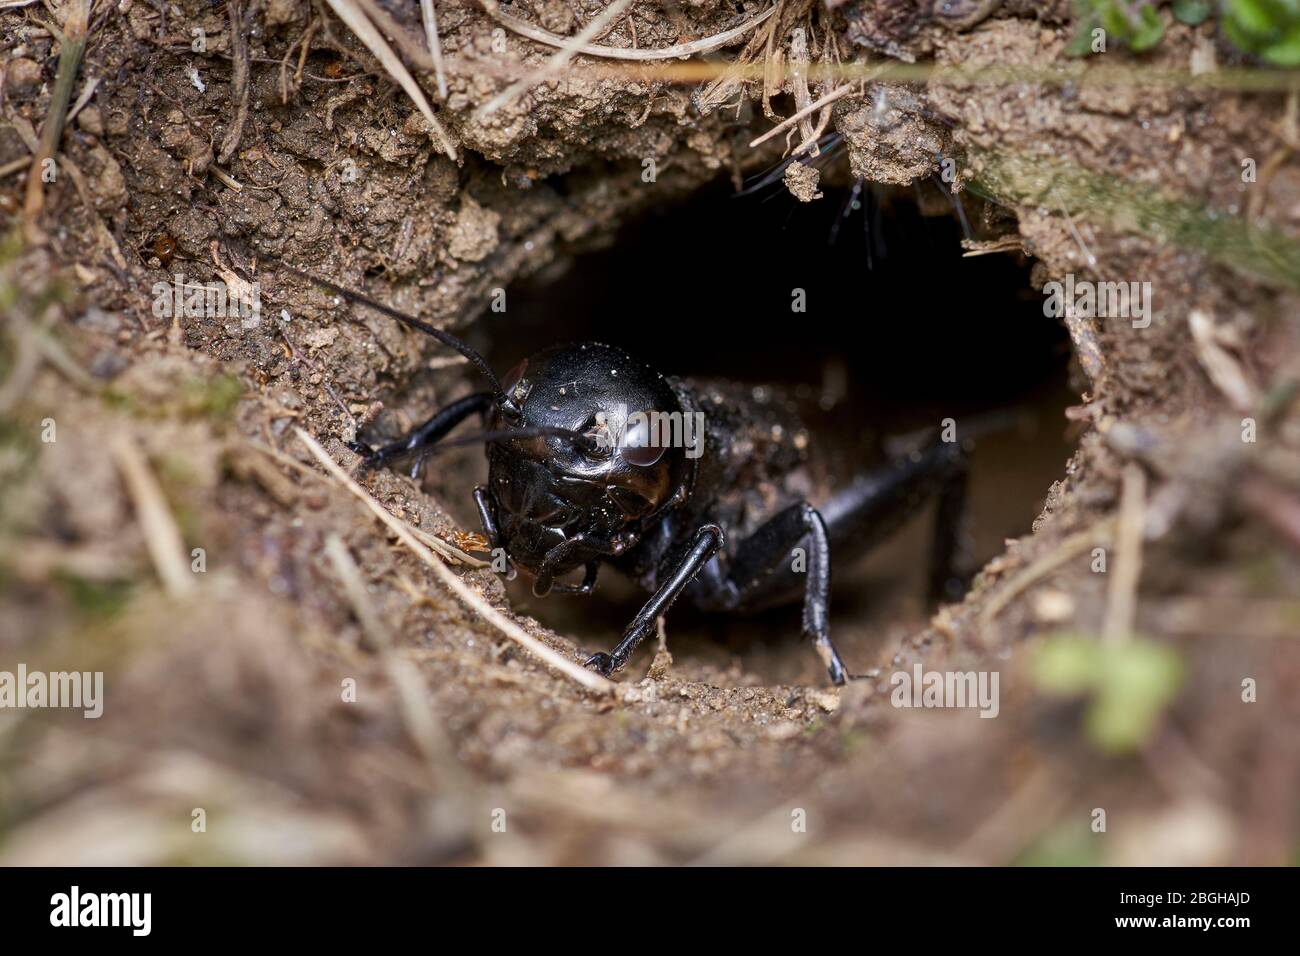 black field cricket crawling carefully out of the burrow Stock Photo